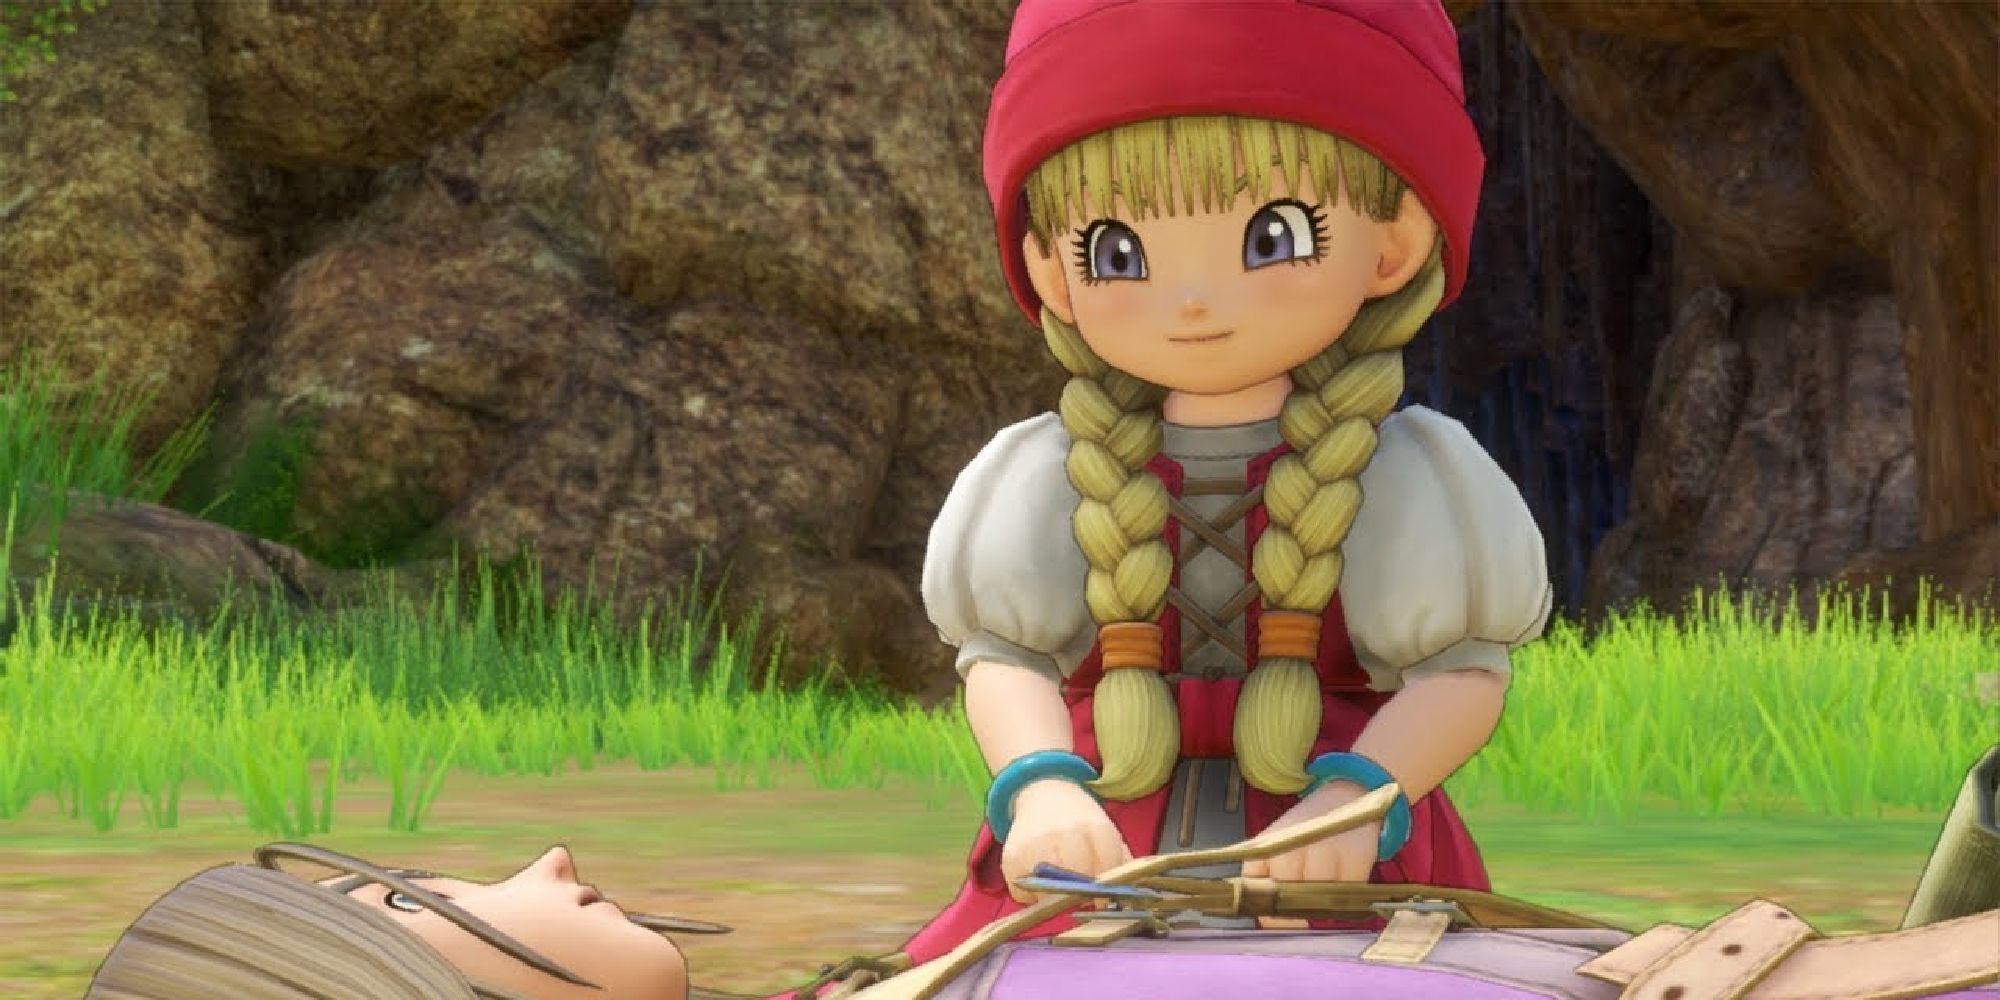 Veronica kneeling beside The Luminary in Dragon Quest XI